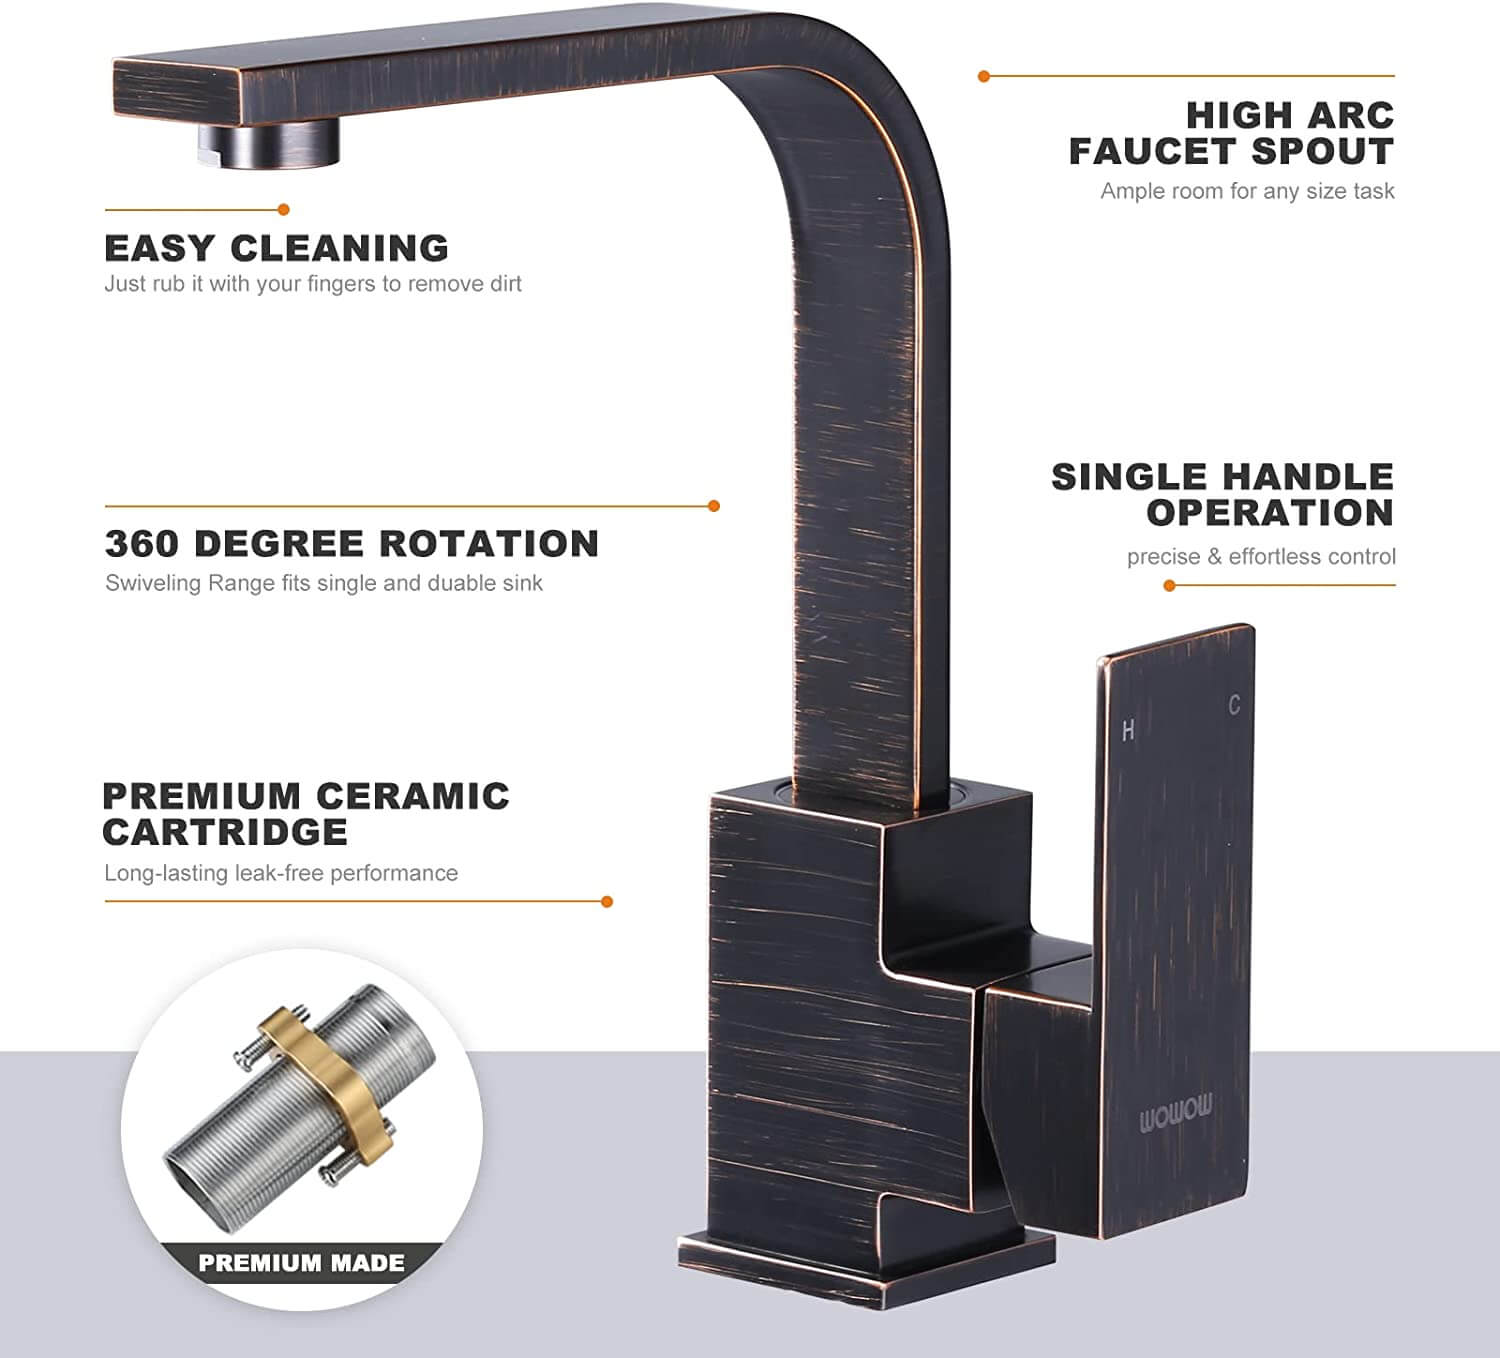 wowow single hole modern oil rubbed bronze bar sink faucet